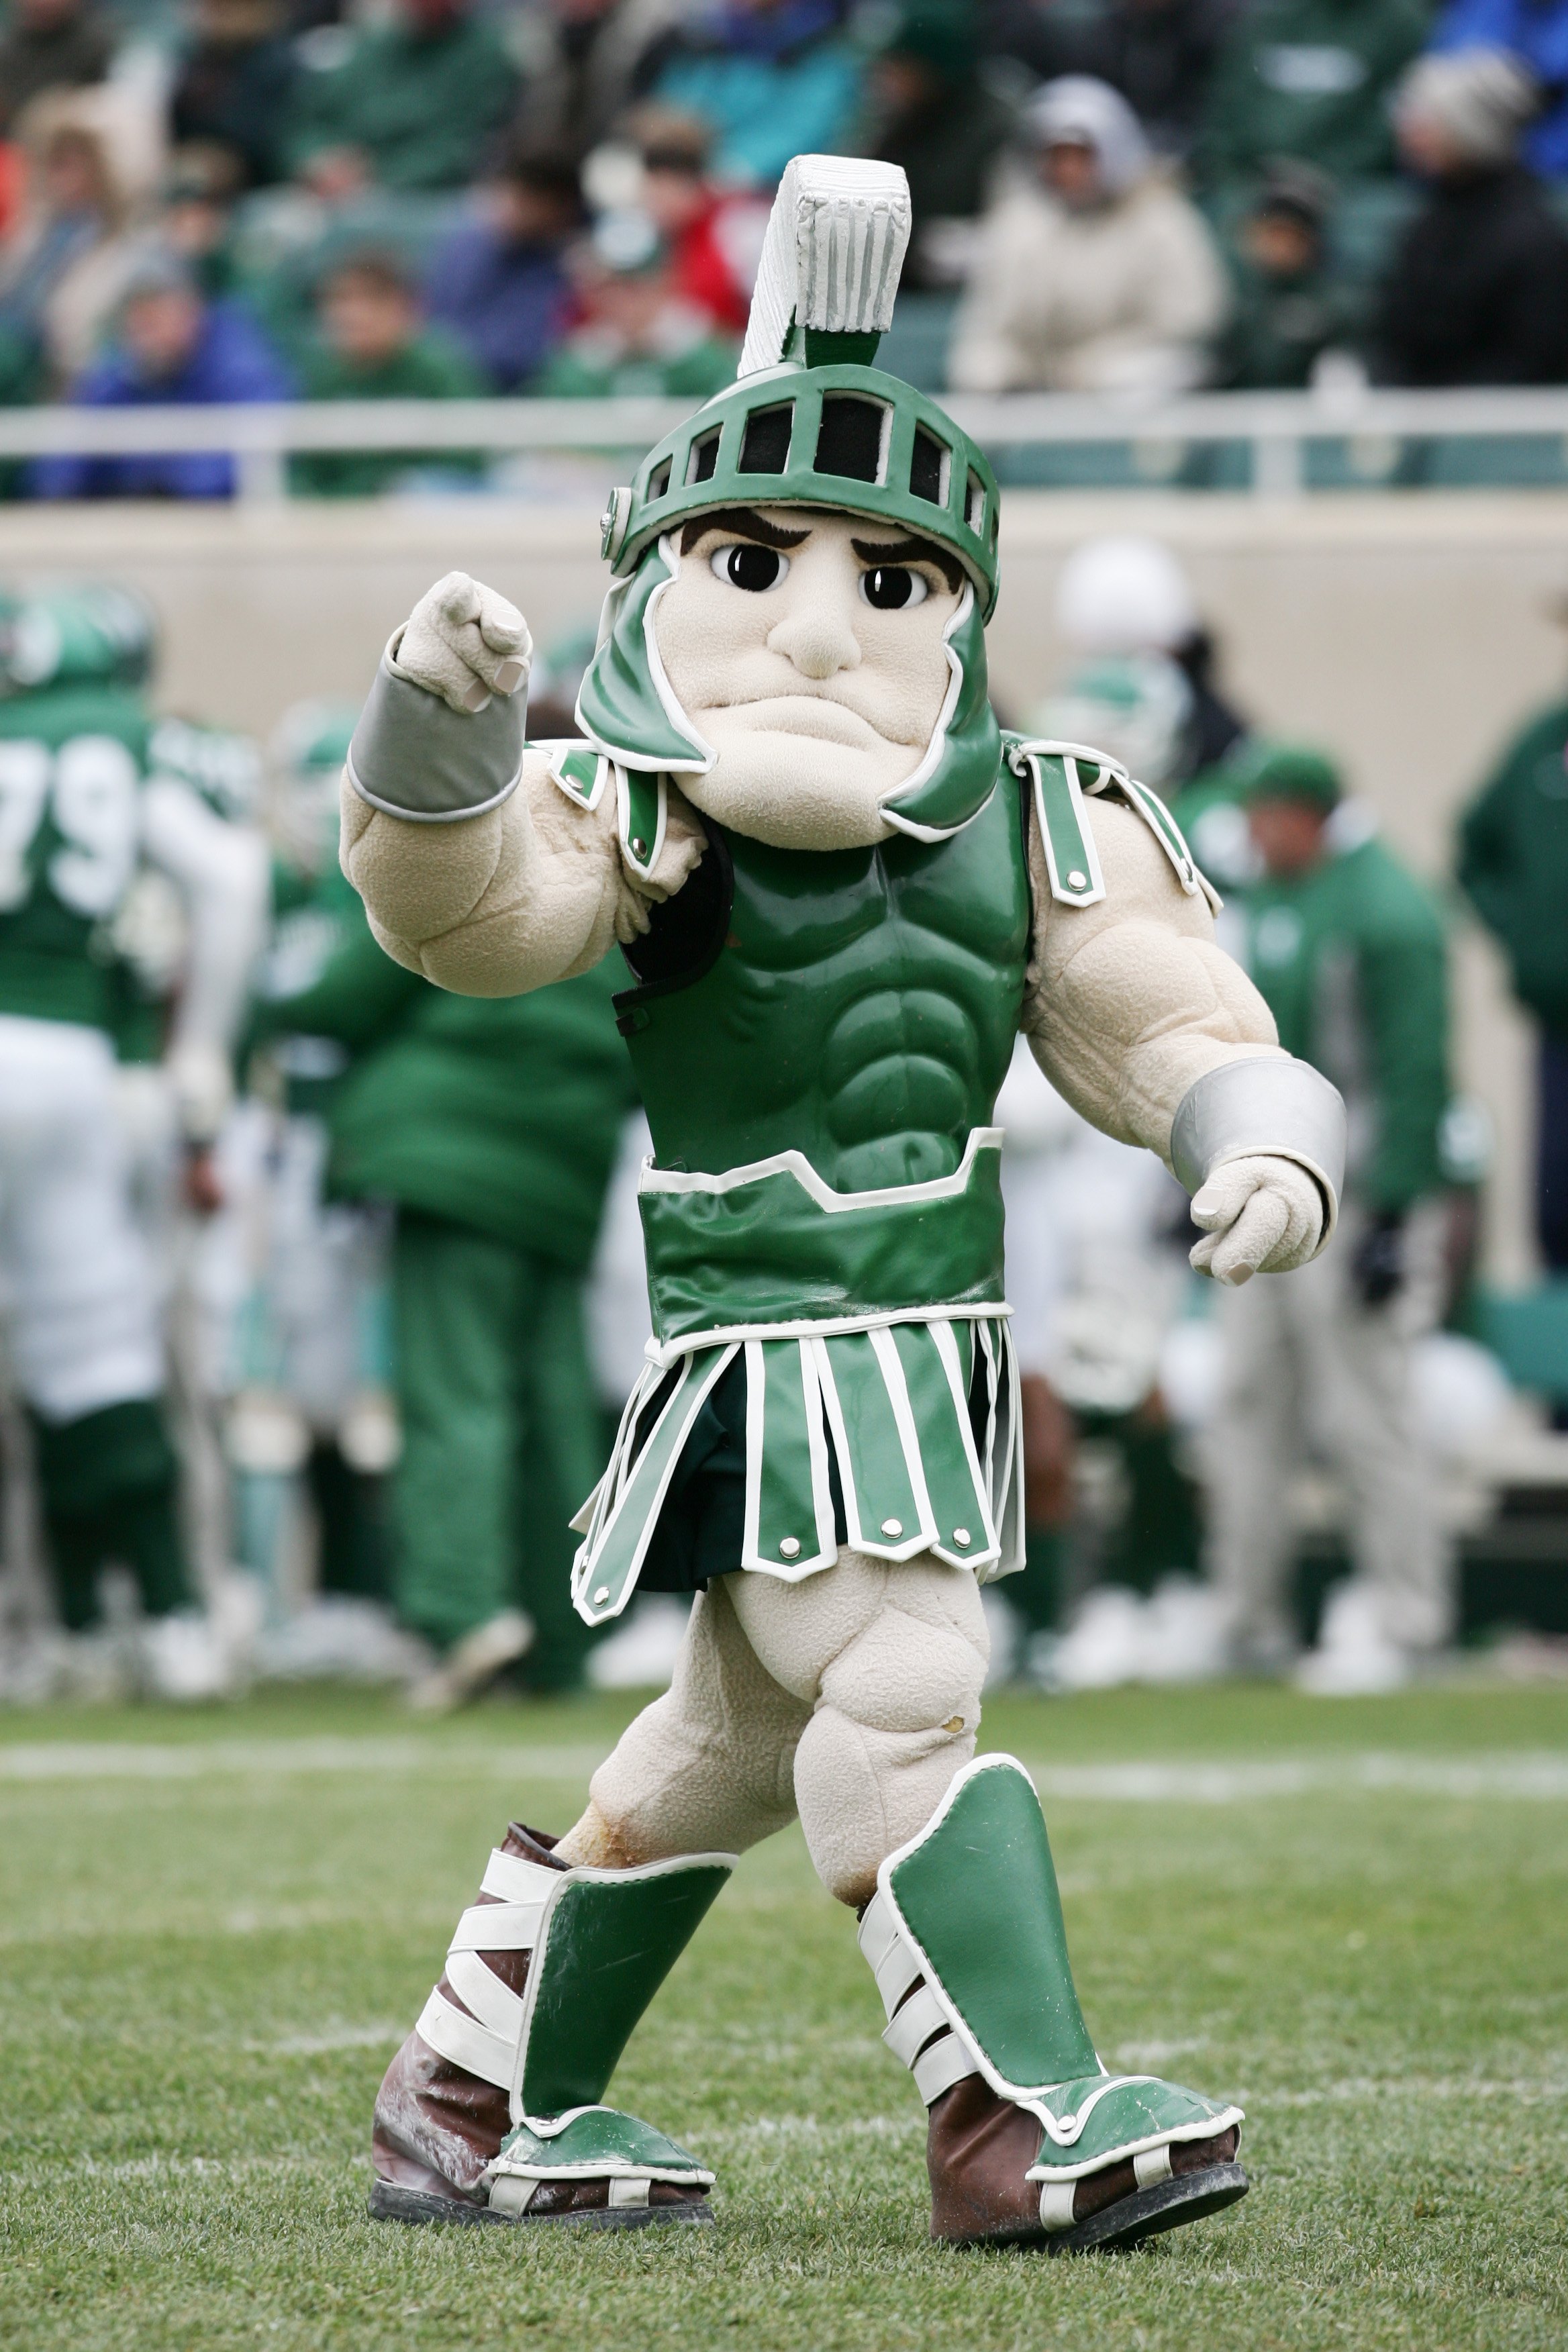 Michigan State Football The Most Beloved Figures In Team History Bleacher Report Latest News Videos And Highlights